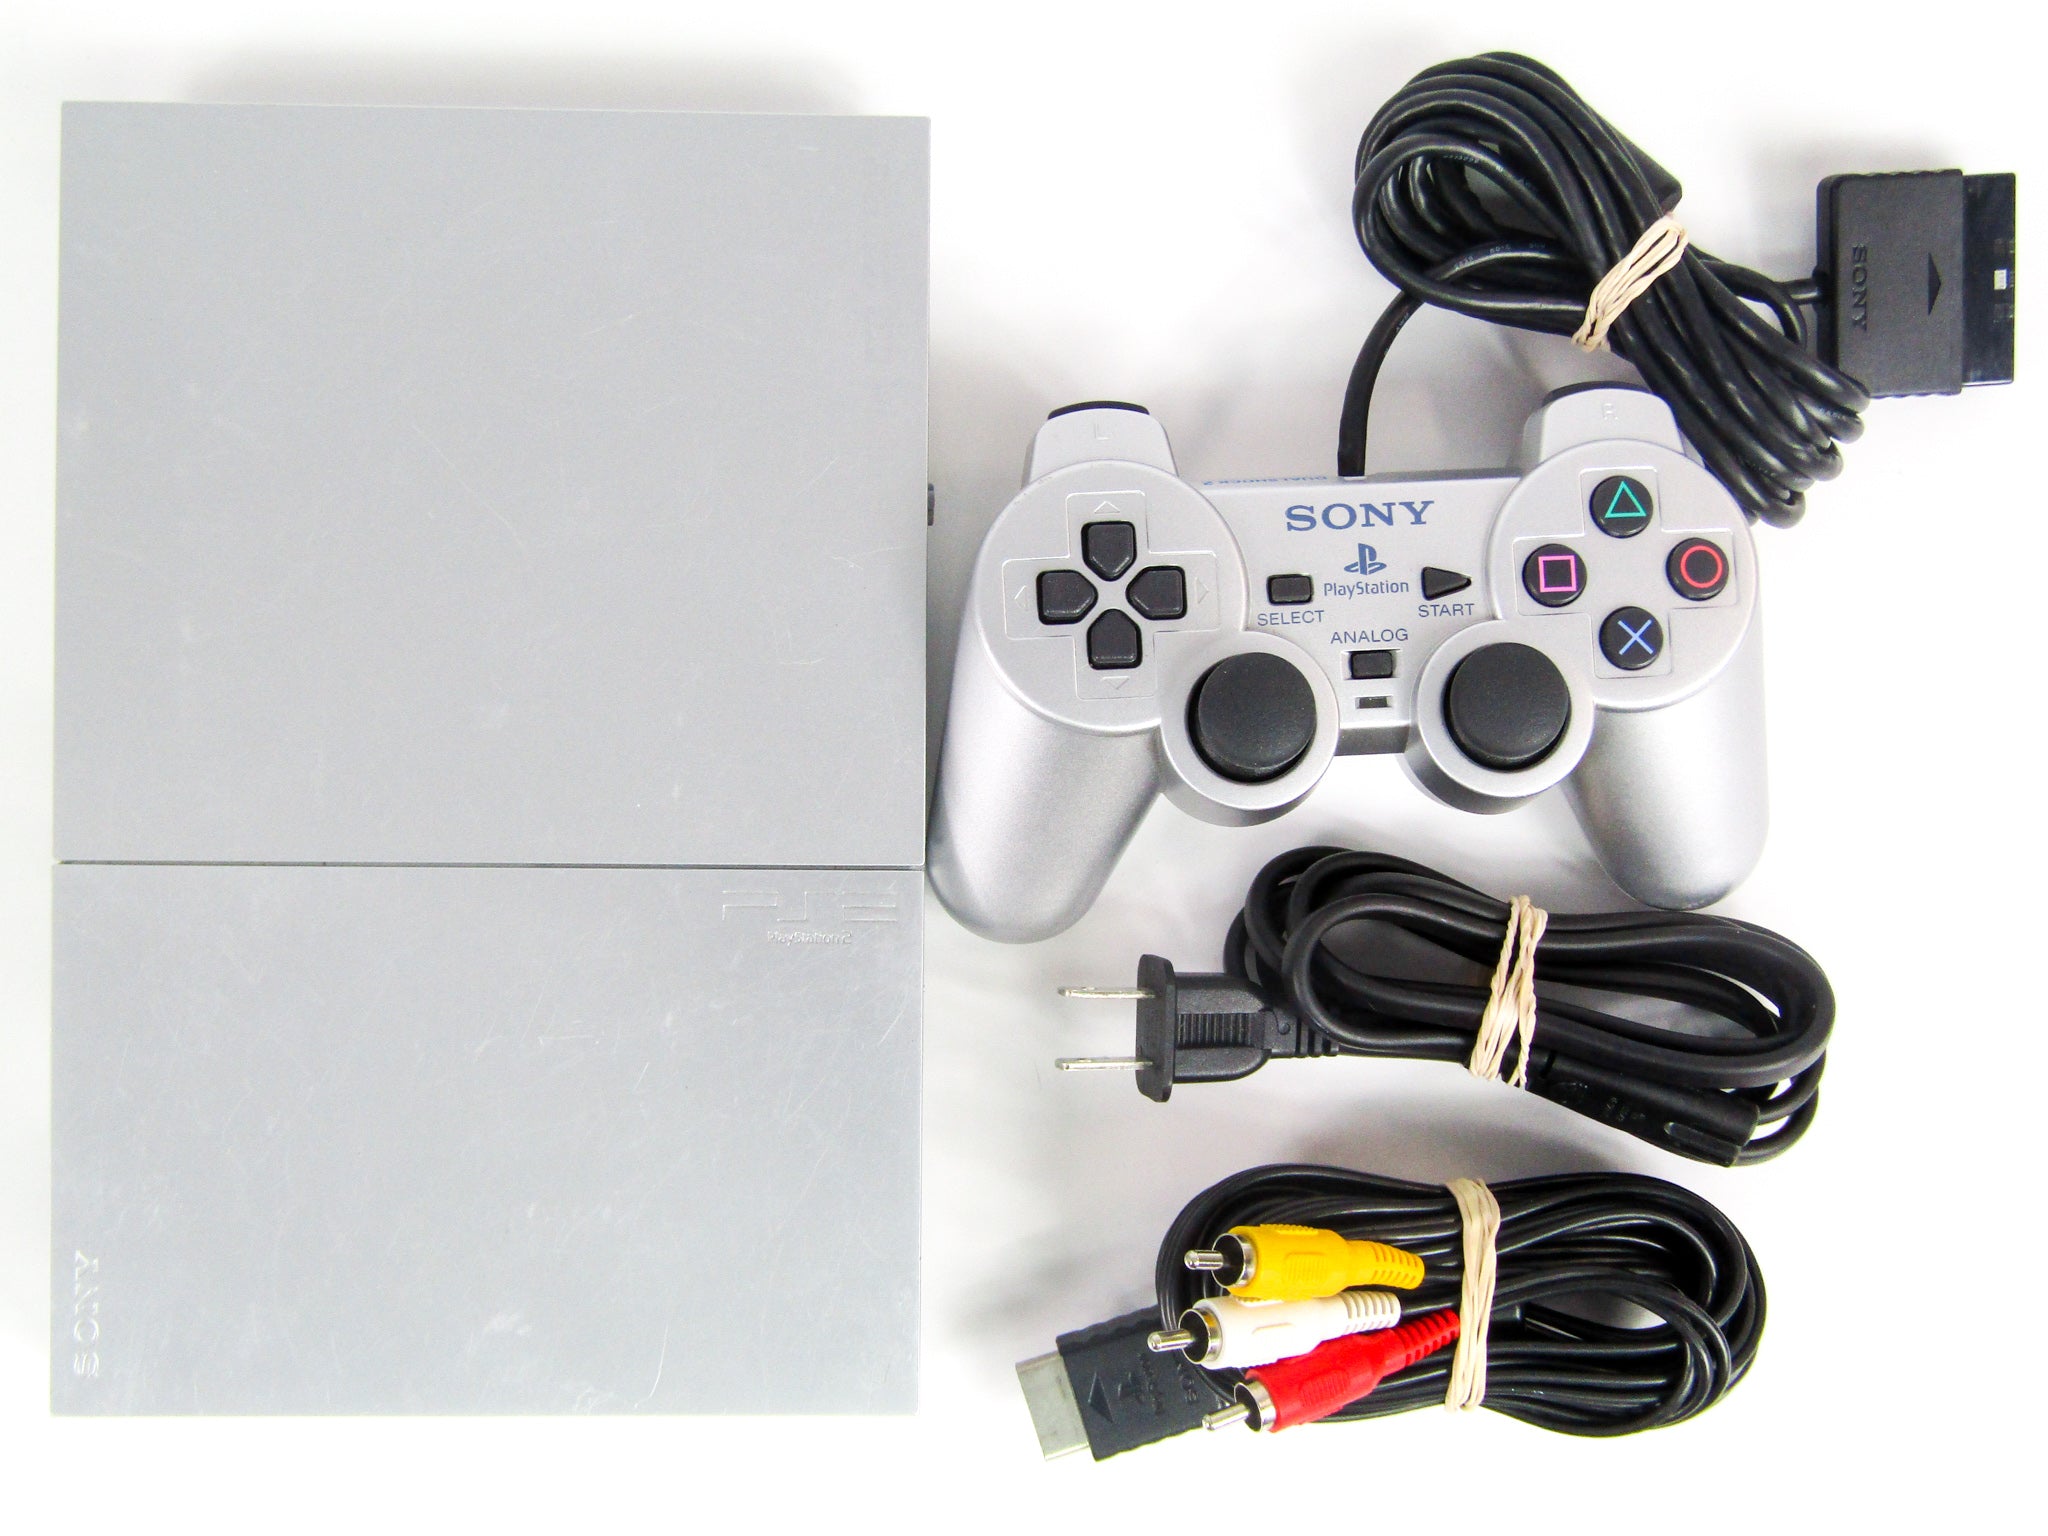 Silver Slim Playstation 2 System With Internal Power Supply [SCPH